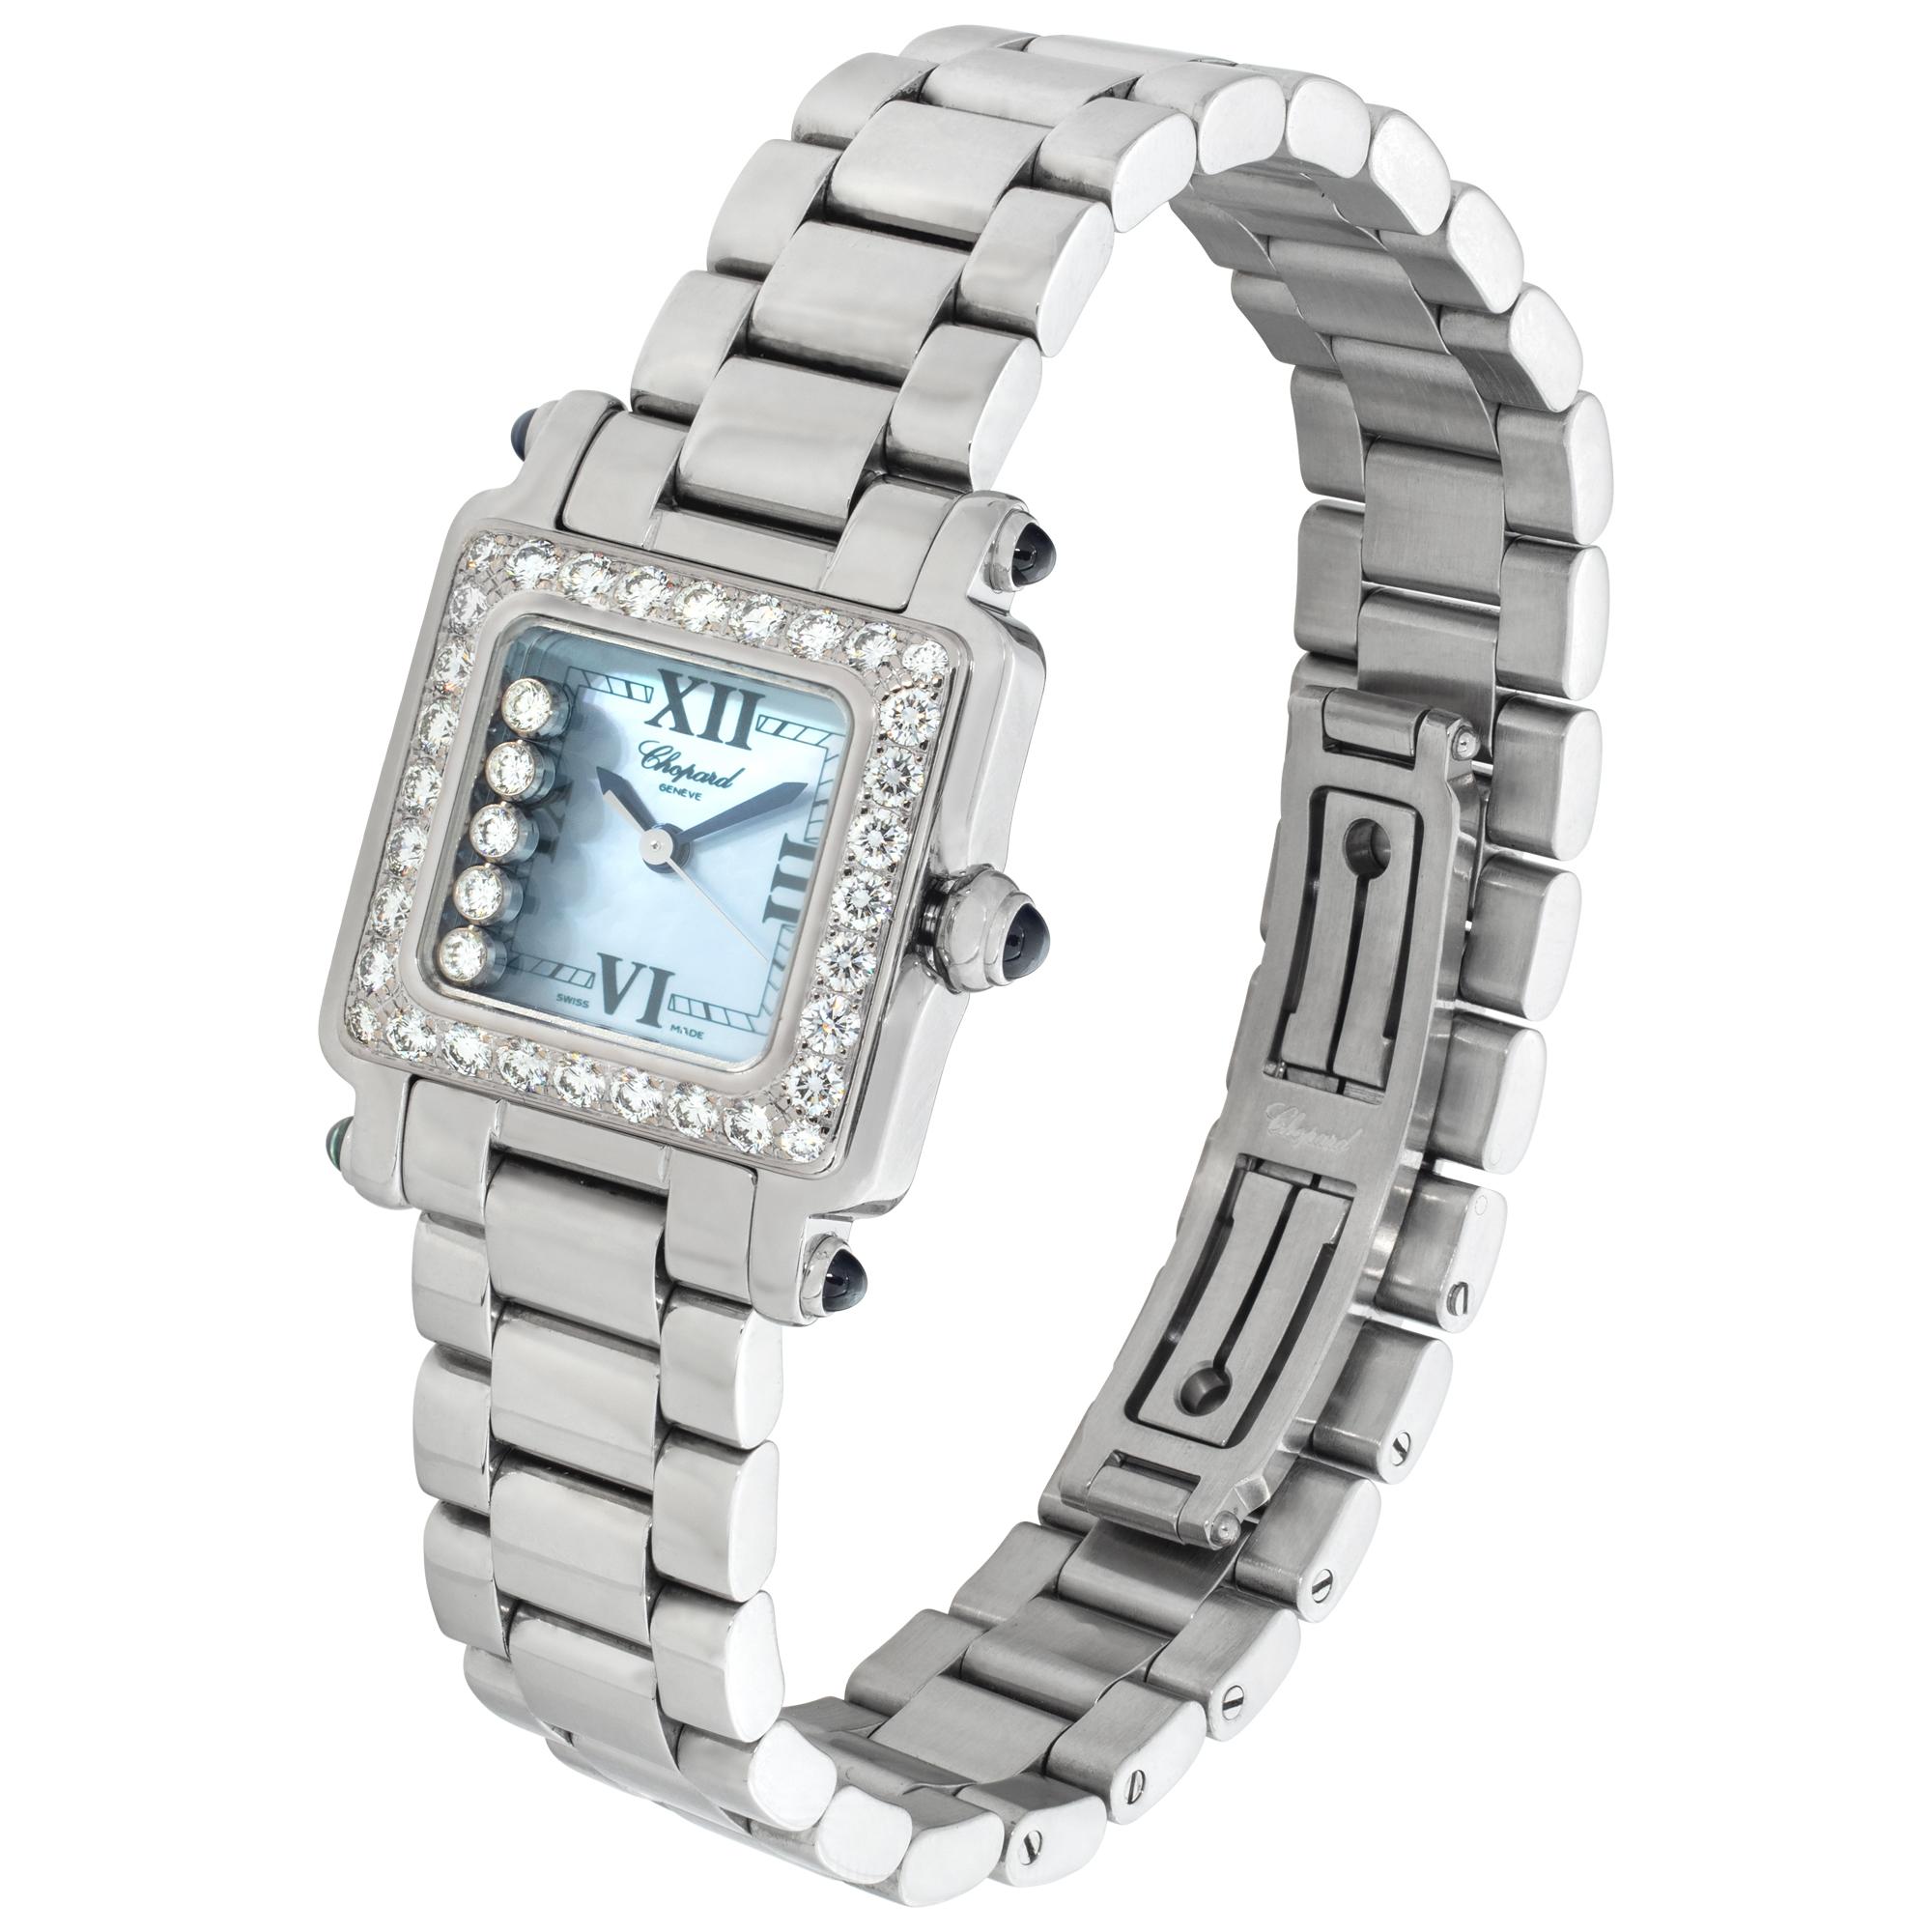 Chopard Happy Sport in stainless steel with original mother of pearl dial and custom diamond bezel. Quartz movement. With Box. 23 mm case size. Ref 8892. Fine Pre-owned Chopard Watch. Certified preowned Classic Chopard Happy Sport 8892 watch is made